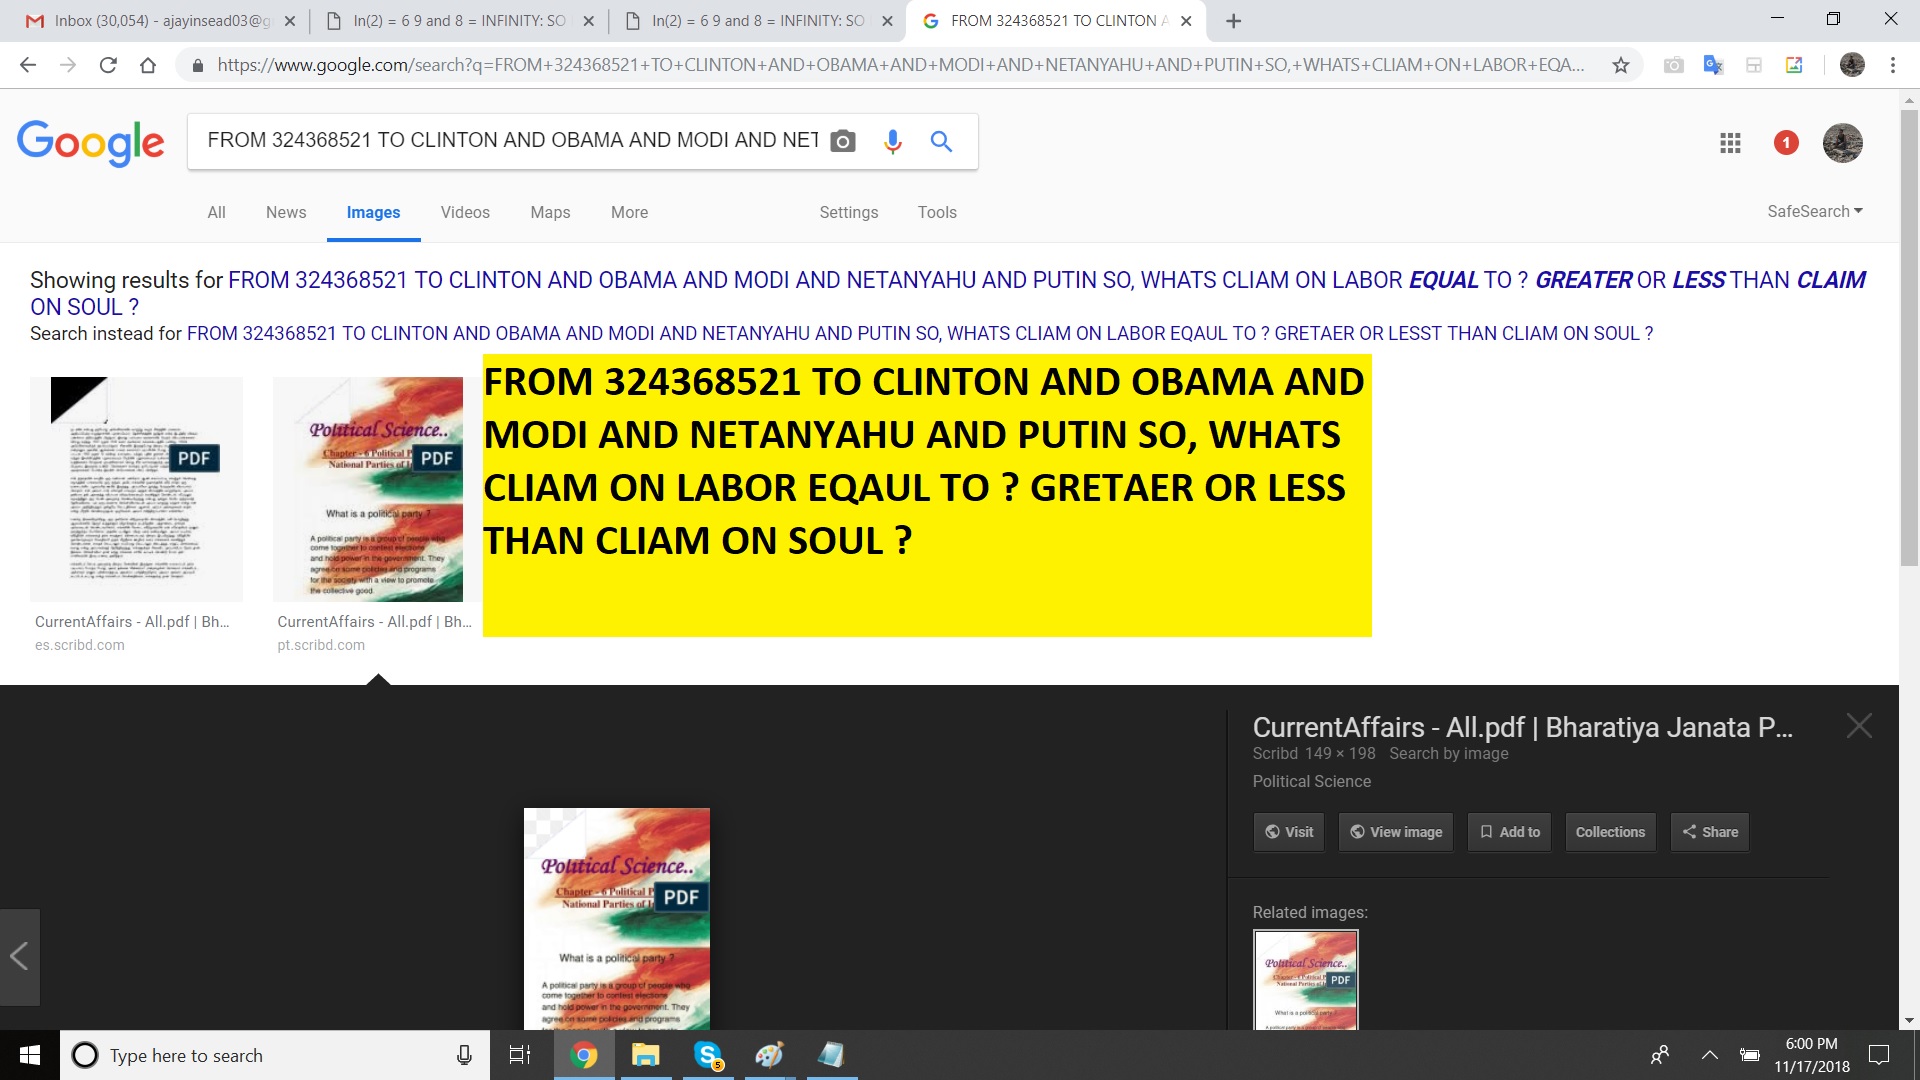 FROM 324368521 TO CLINTON AND OBAMA AND MODI AND NETANYAHU AND PUTIN SO, WHATS CLIAM ON LABOR EQAUL TO GRETAER OR LESST THAN CLIAM ON SOUL